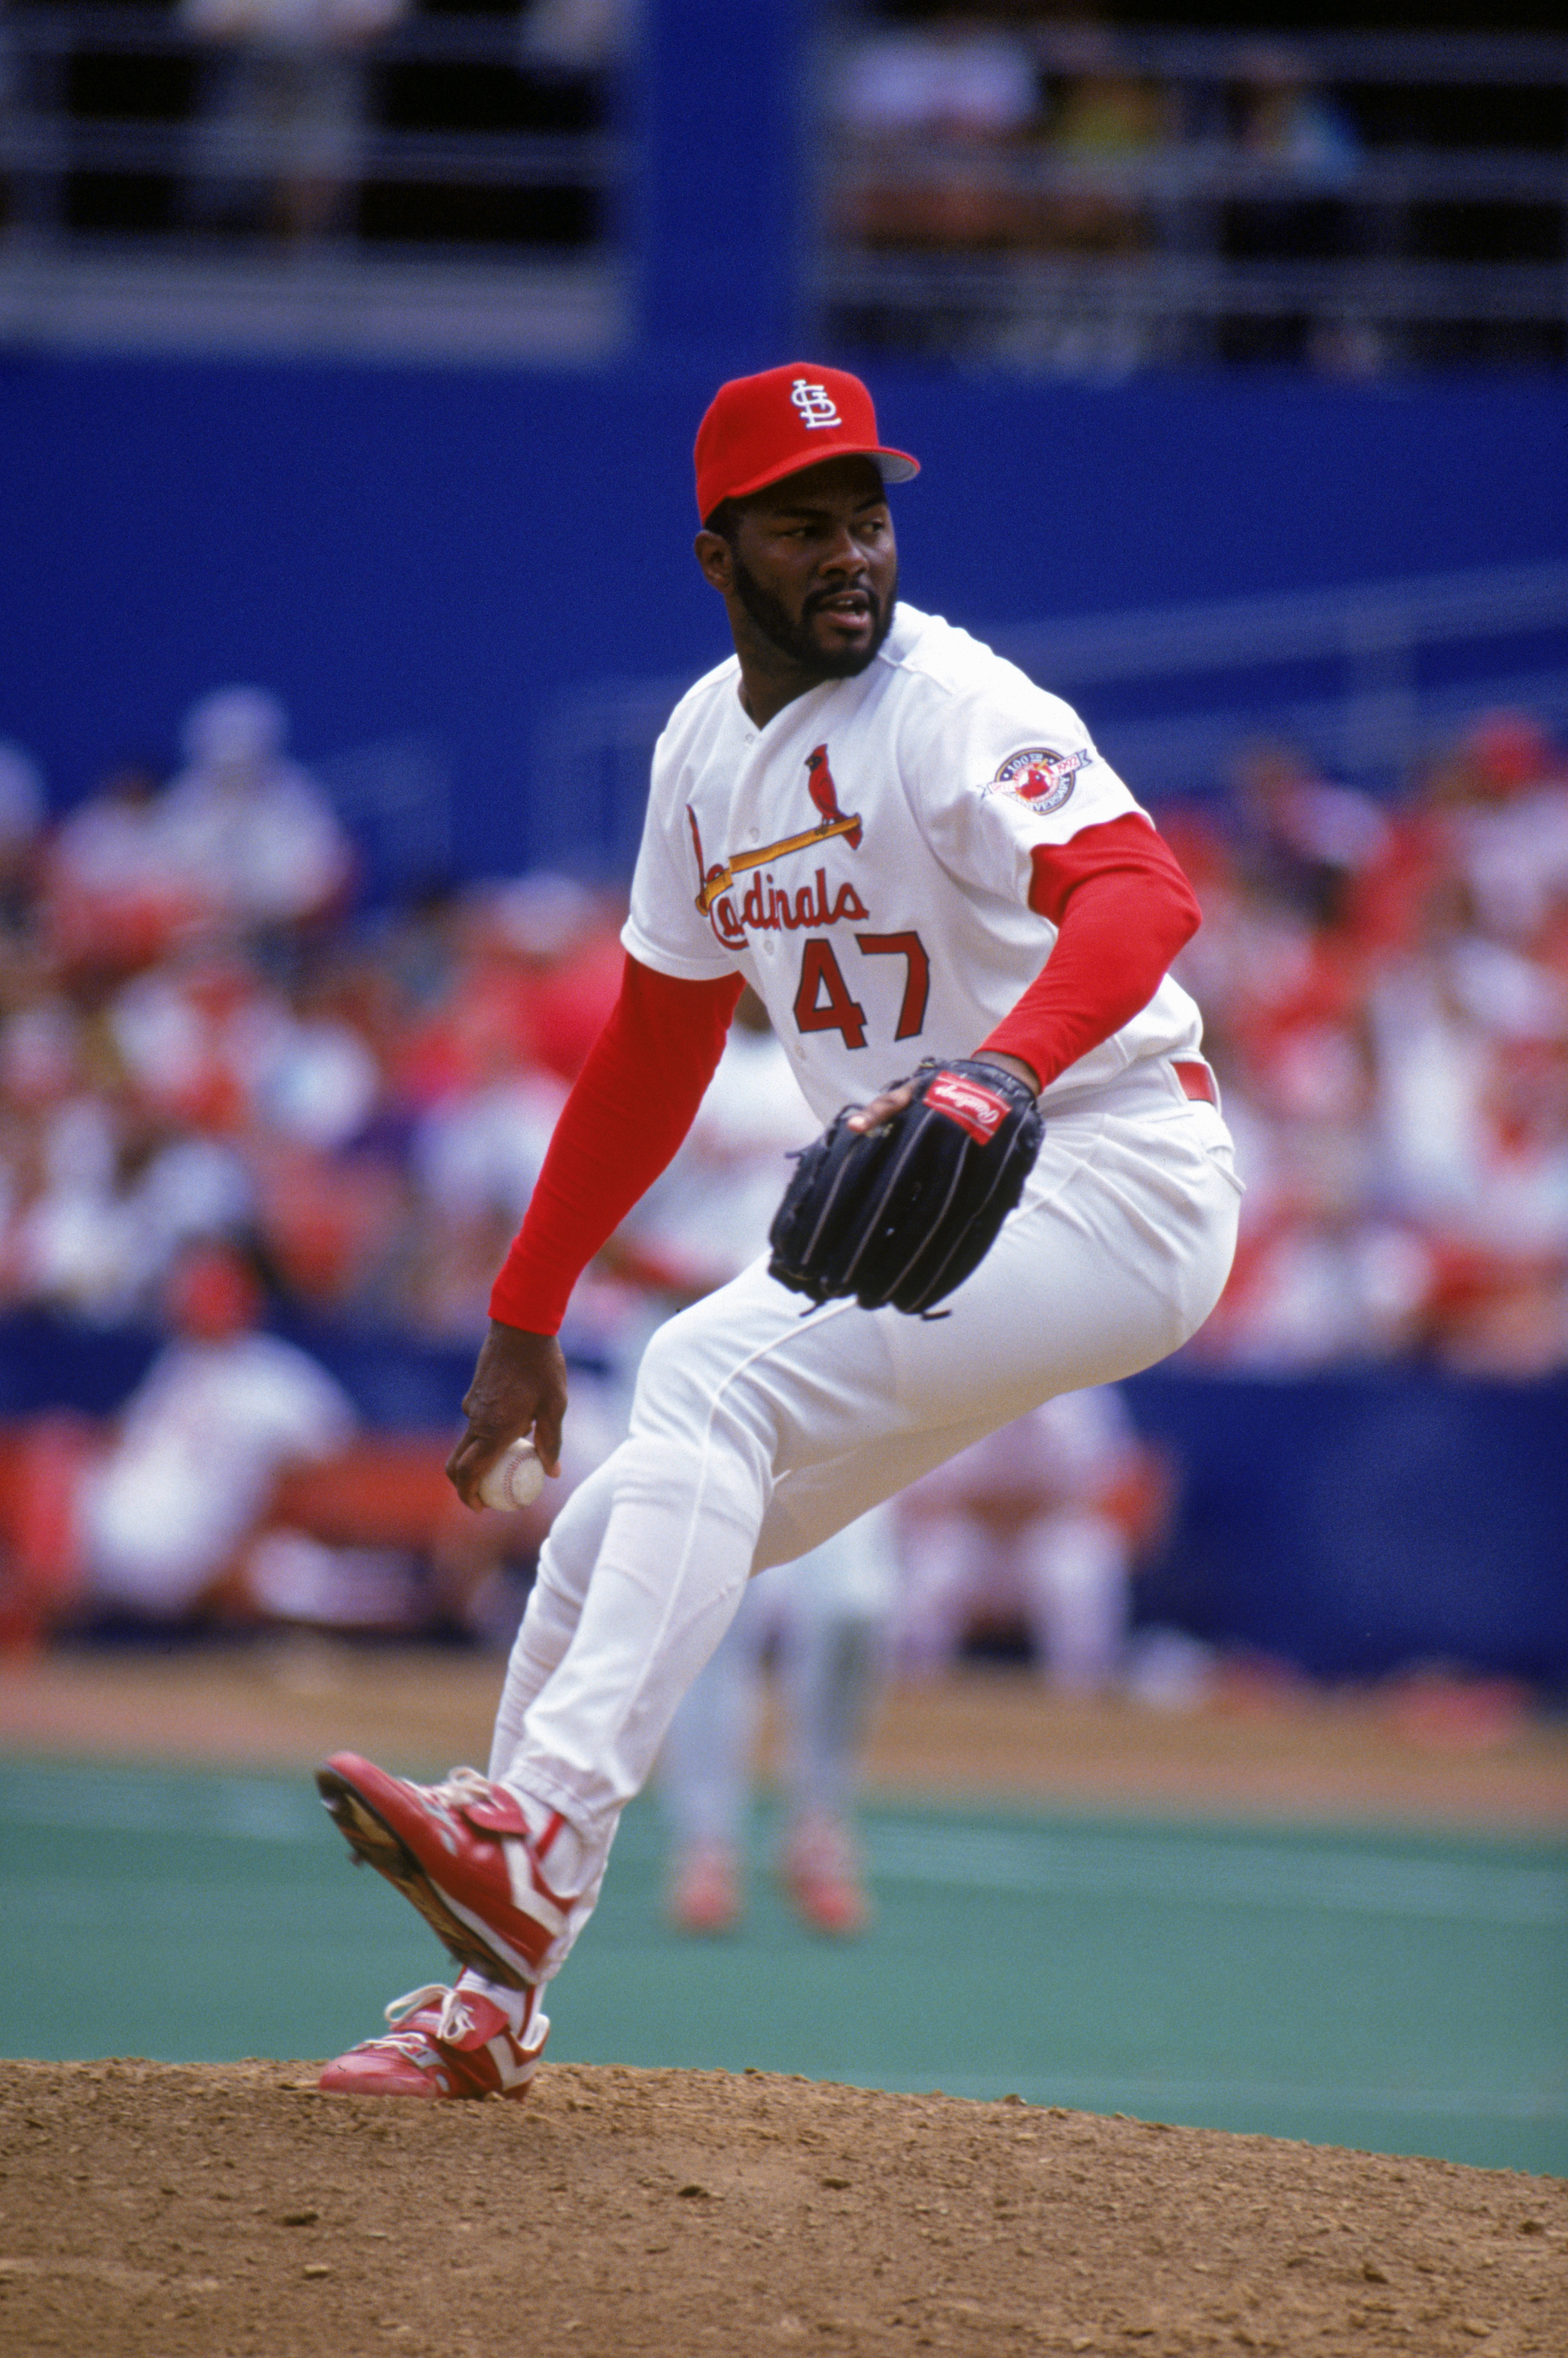 ST. LOUIS - AUGUST:  Lee Smith #47 of the St. Louis Cardinals pitches during a game in August 1992 at Busch Stadium in St. Louis, Missouri.  (Photo by Jonathan Daniel/Getty Images)